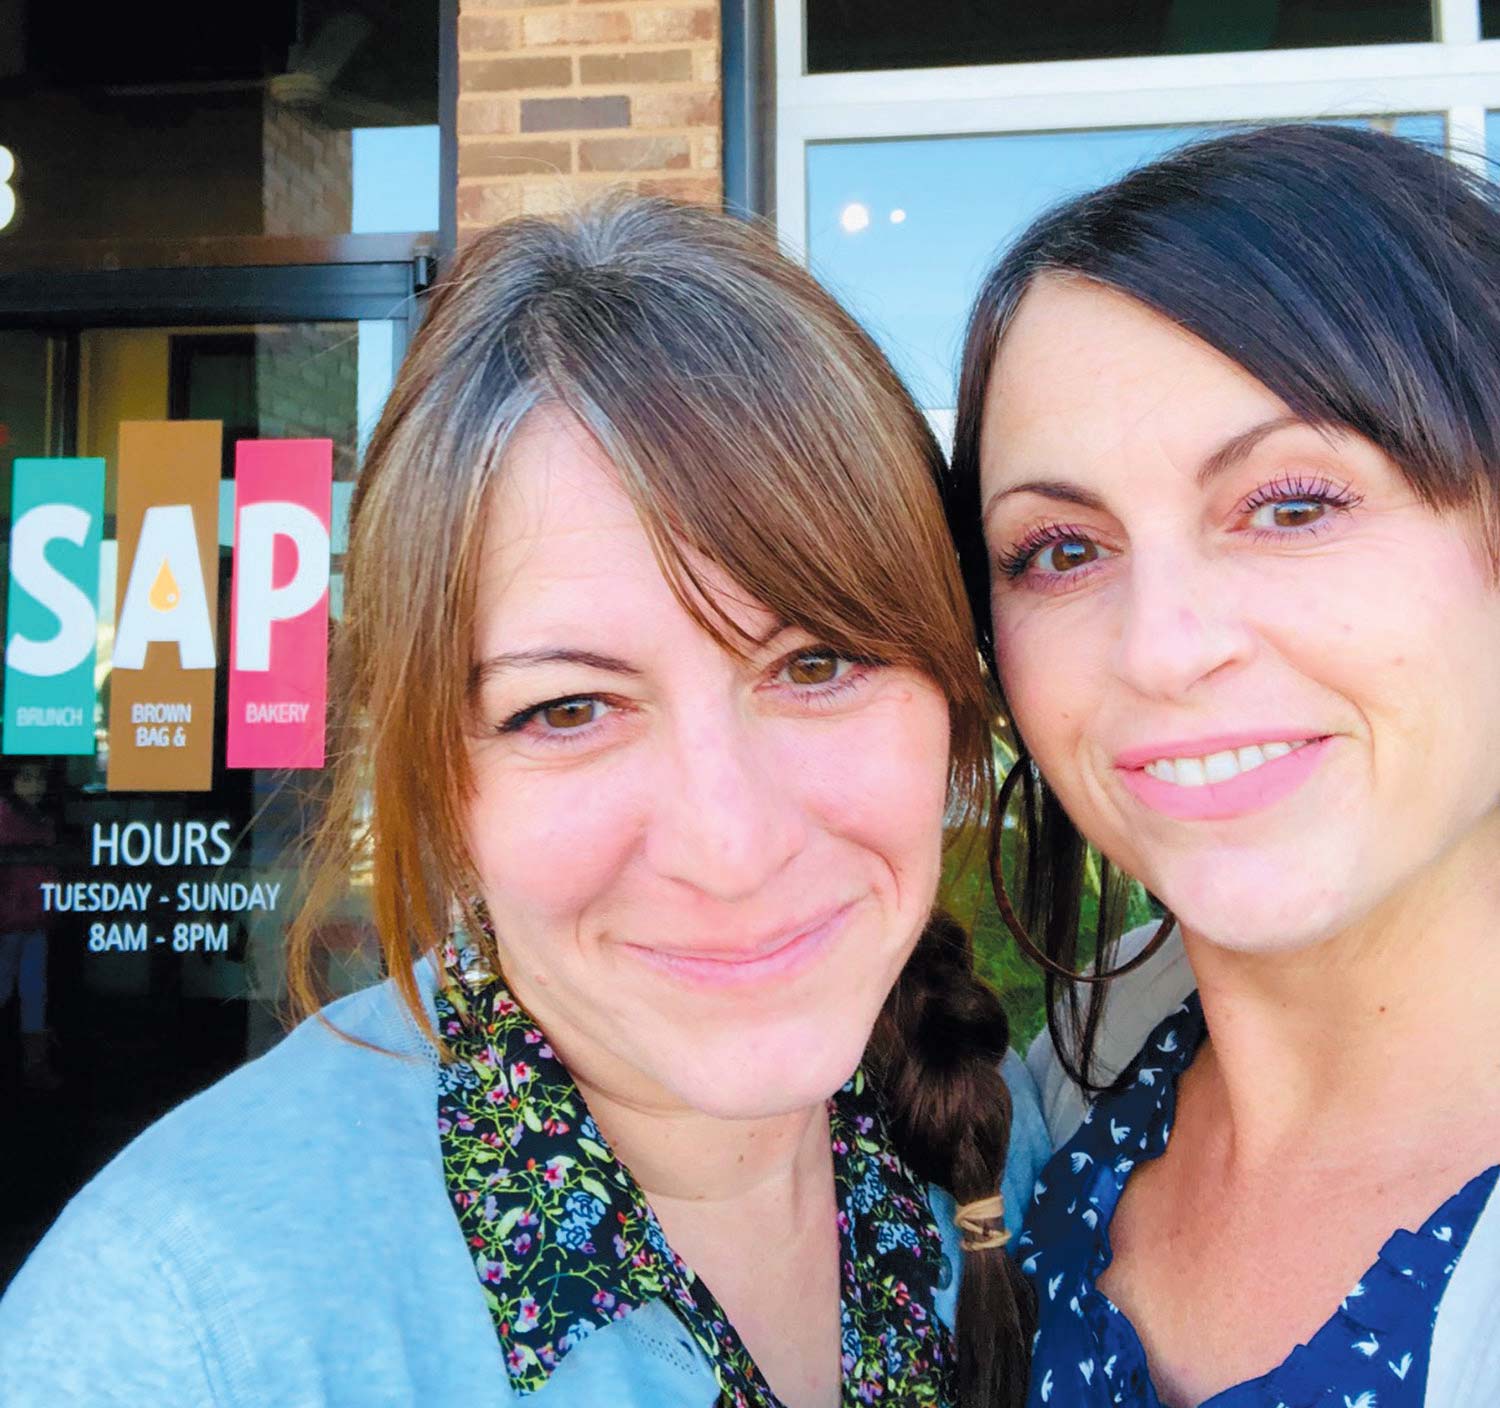 Nicole DeFranza and Kristen Sickler in front of their newest creation, SAP. Contributed photo